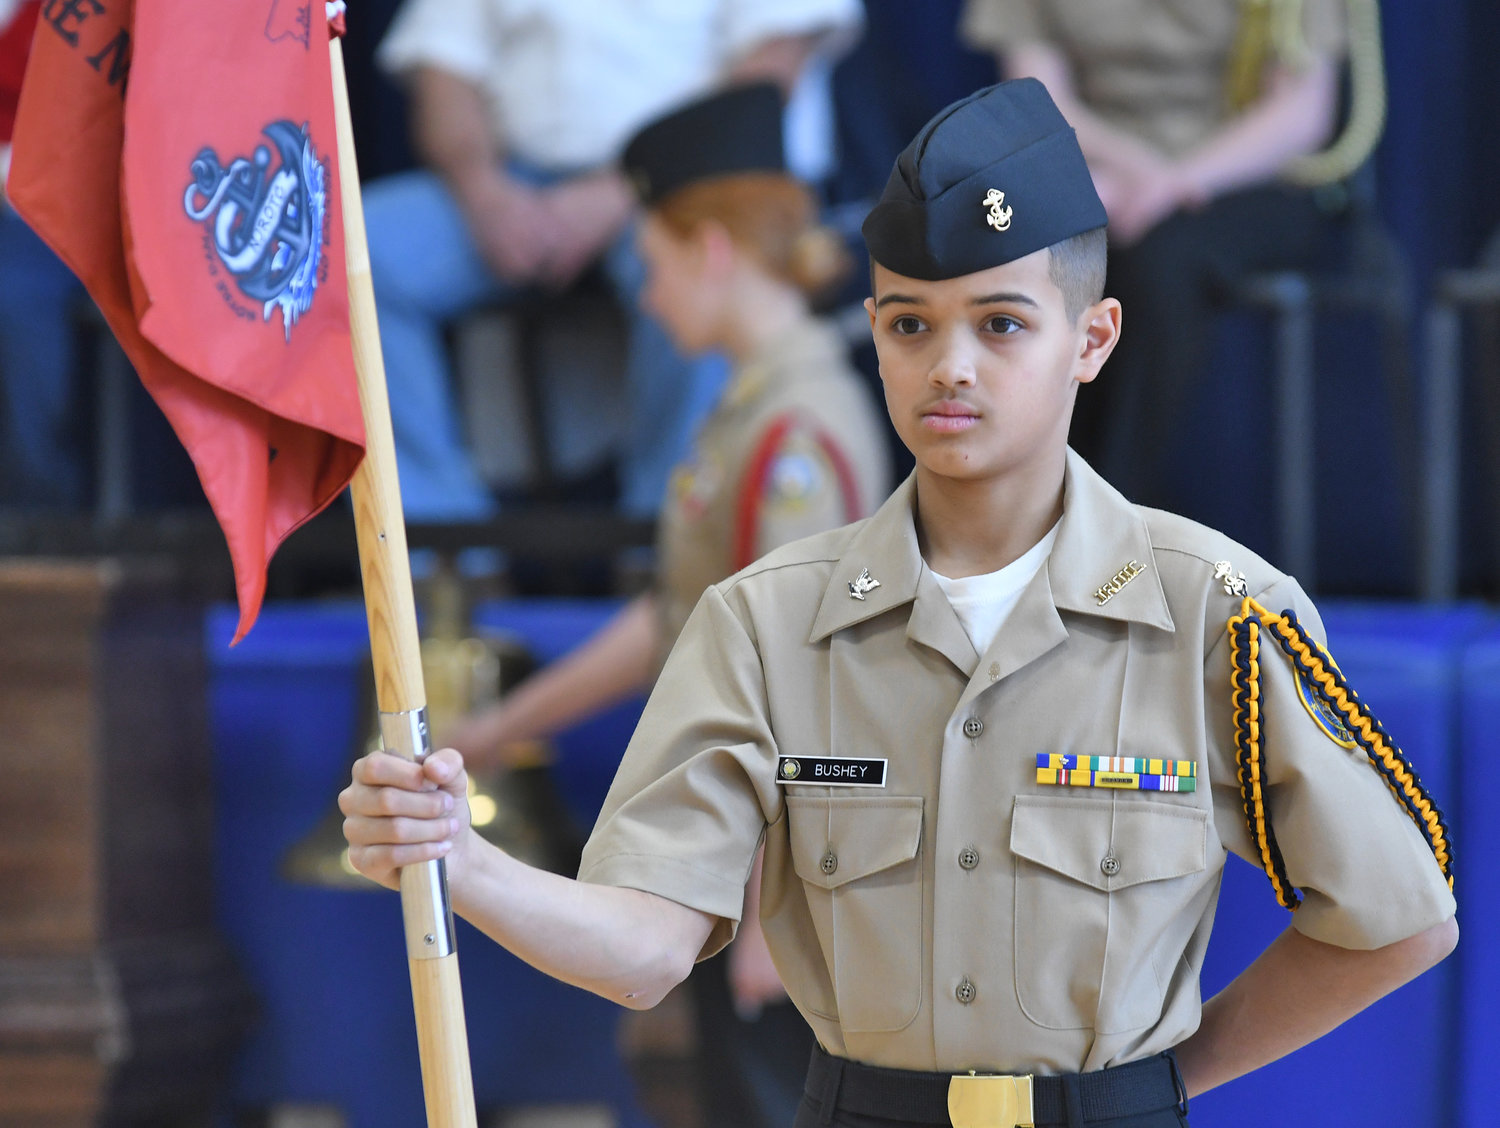 Notre Dame Navy Junior ROTC member Jamarhy Bushy stands at attention with the unit's guidon Monday, Dec.12 during the Wreaths Across America ceremony at the Utica high school.